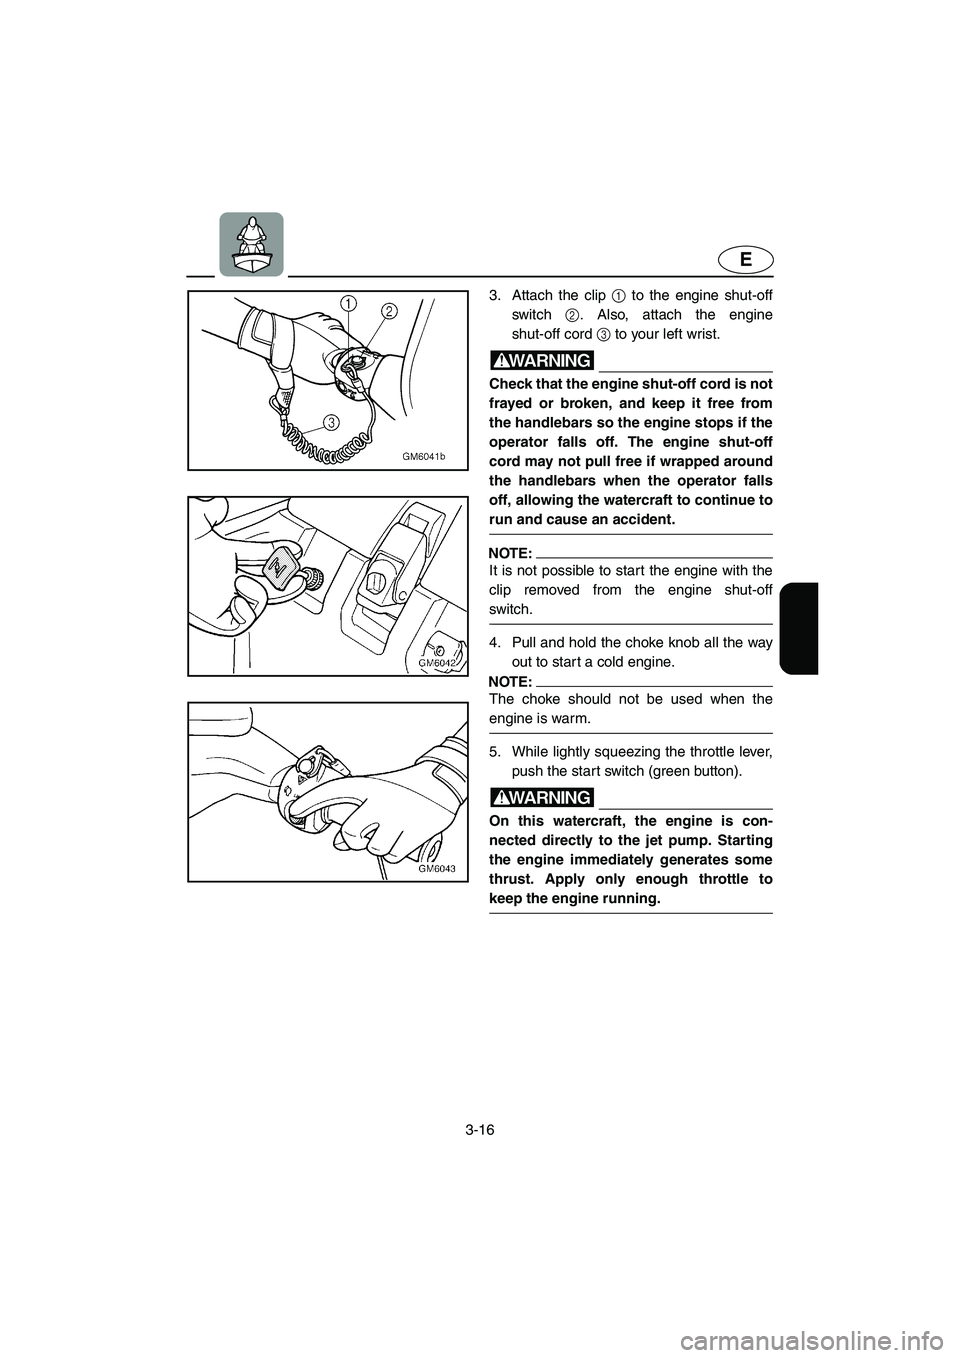 YAMAHA SUPERJET 2002  Owners Manual 3-16
E
3. Attach the clip 1 to the engine shut-off
switch 2. Also, attach the engine
shut-off cord 3 to your left wrist. 
WARNING@ Check that the engine shut-off cord is not
frayed or broken, and keep